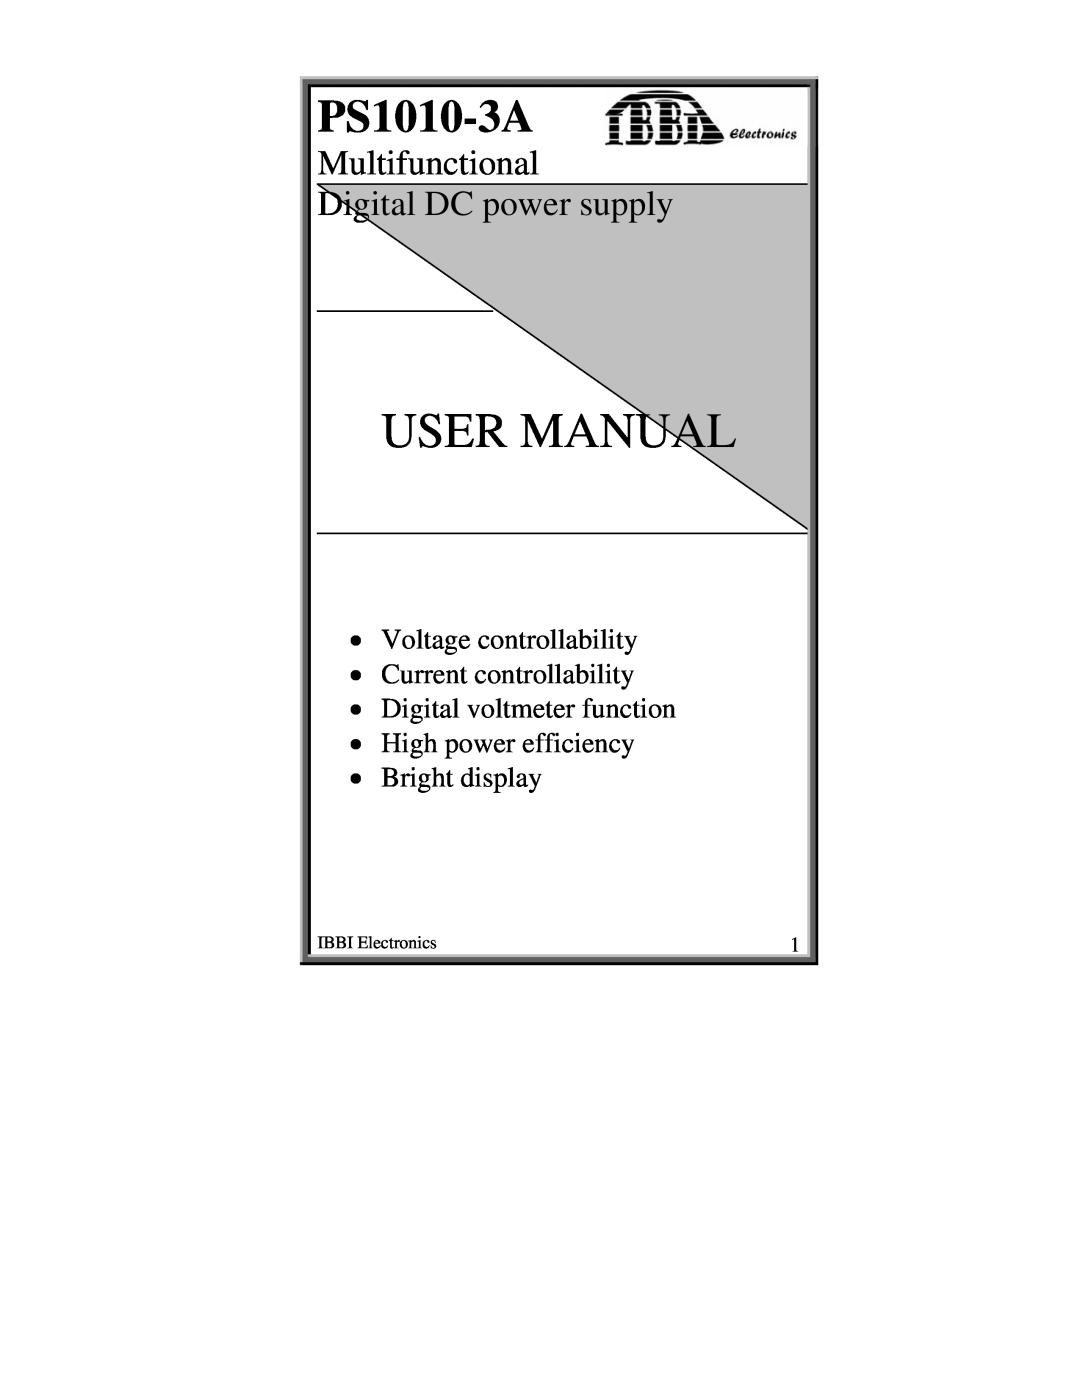 First Virtual Communications PS1010-3A user manual Voltage controllability Current controllability, User Manual 